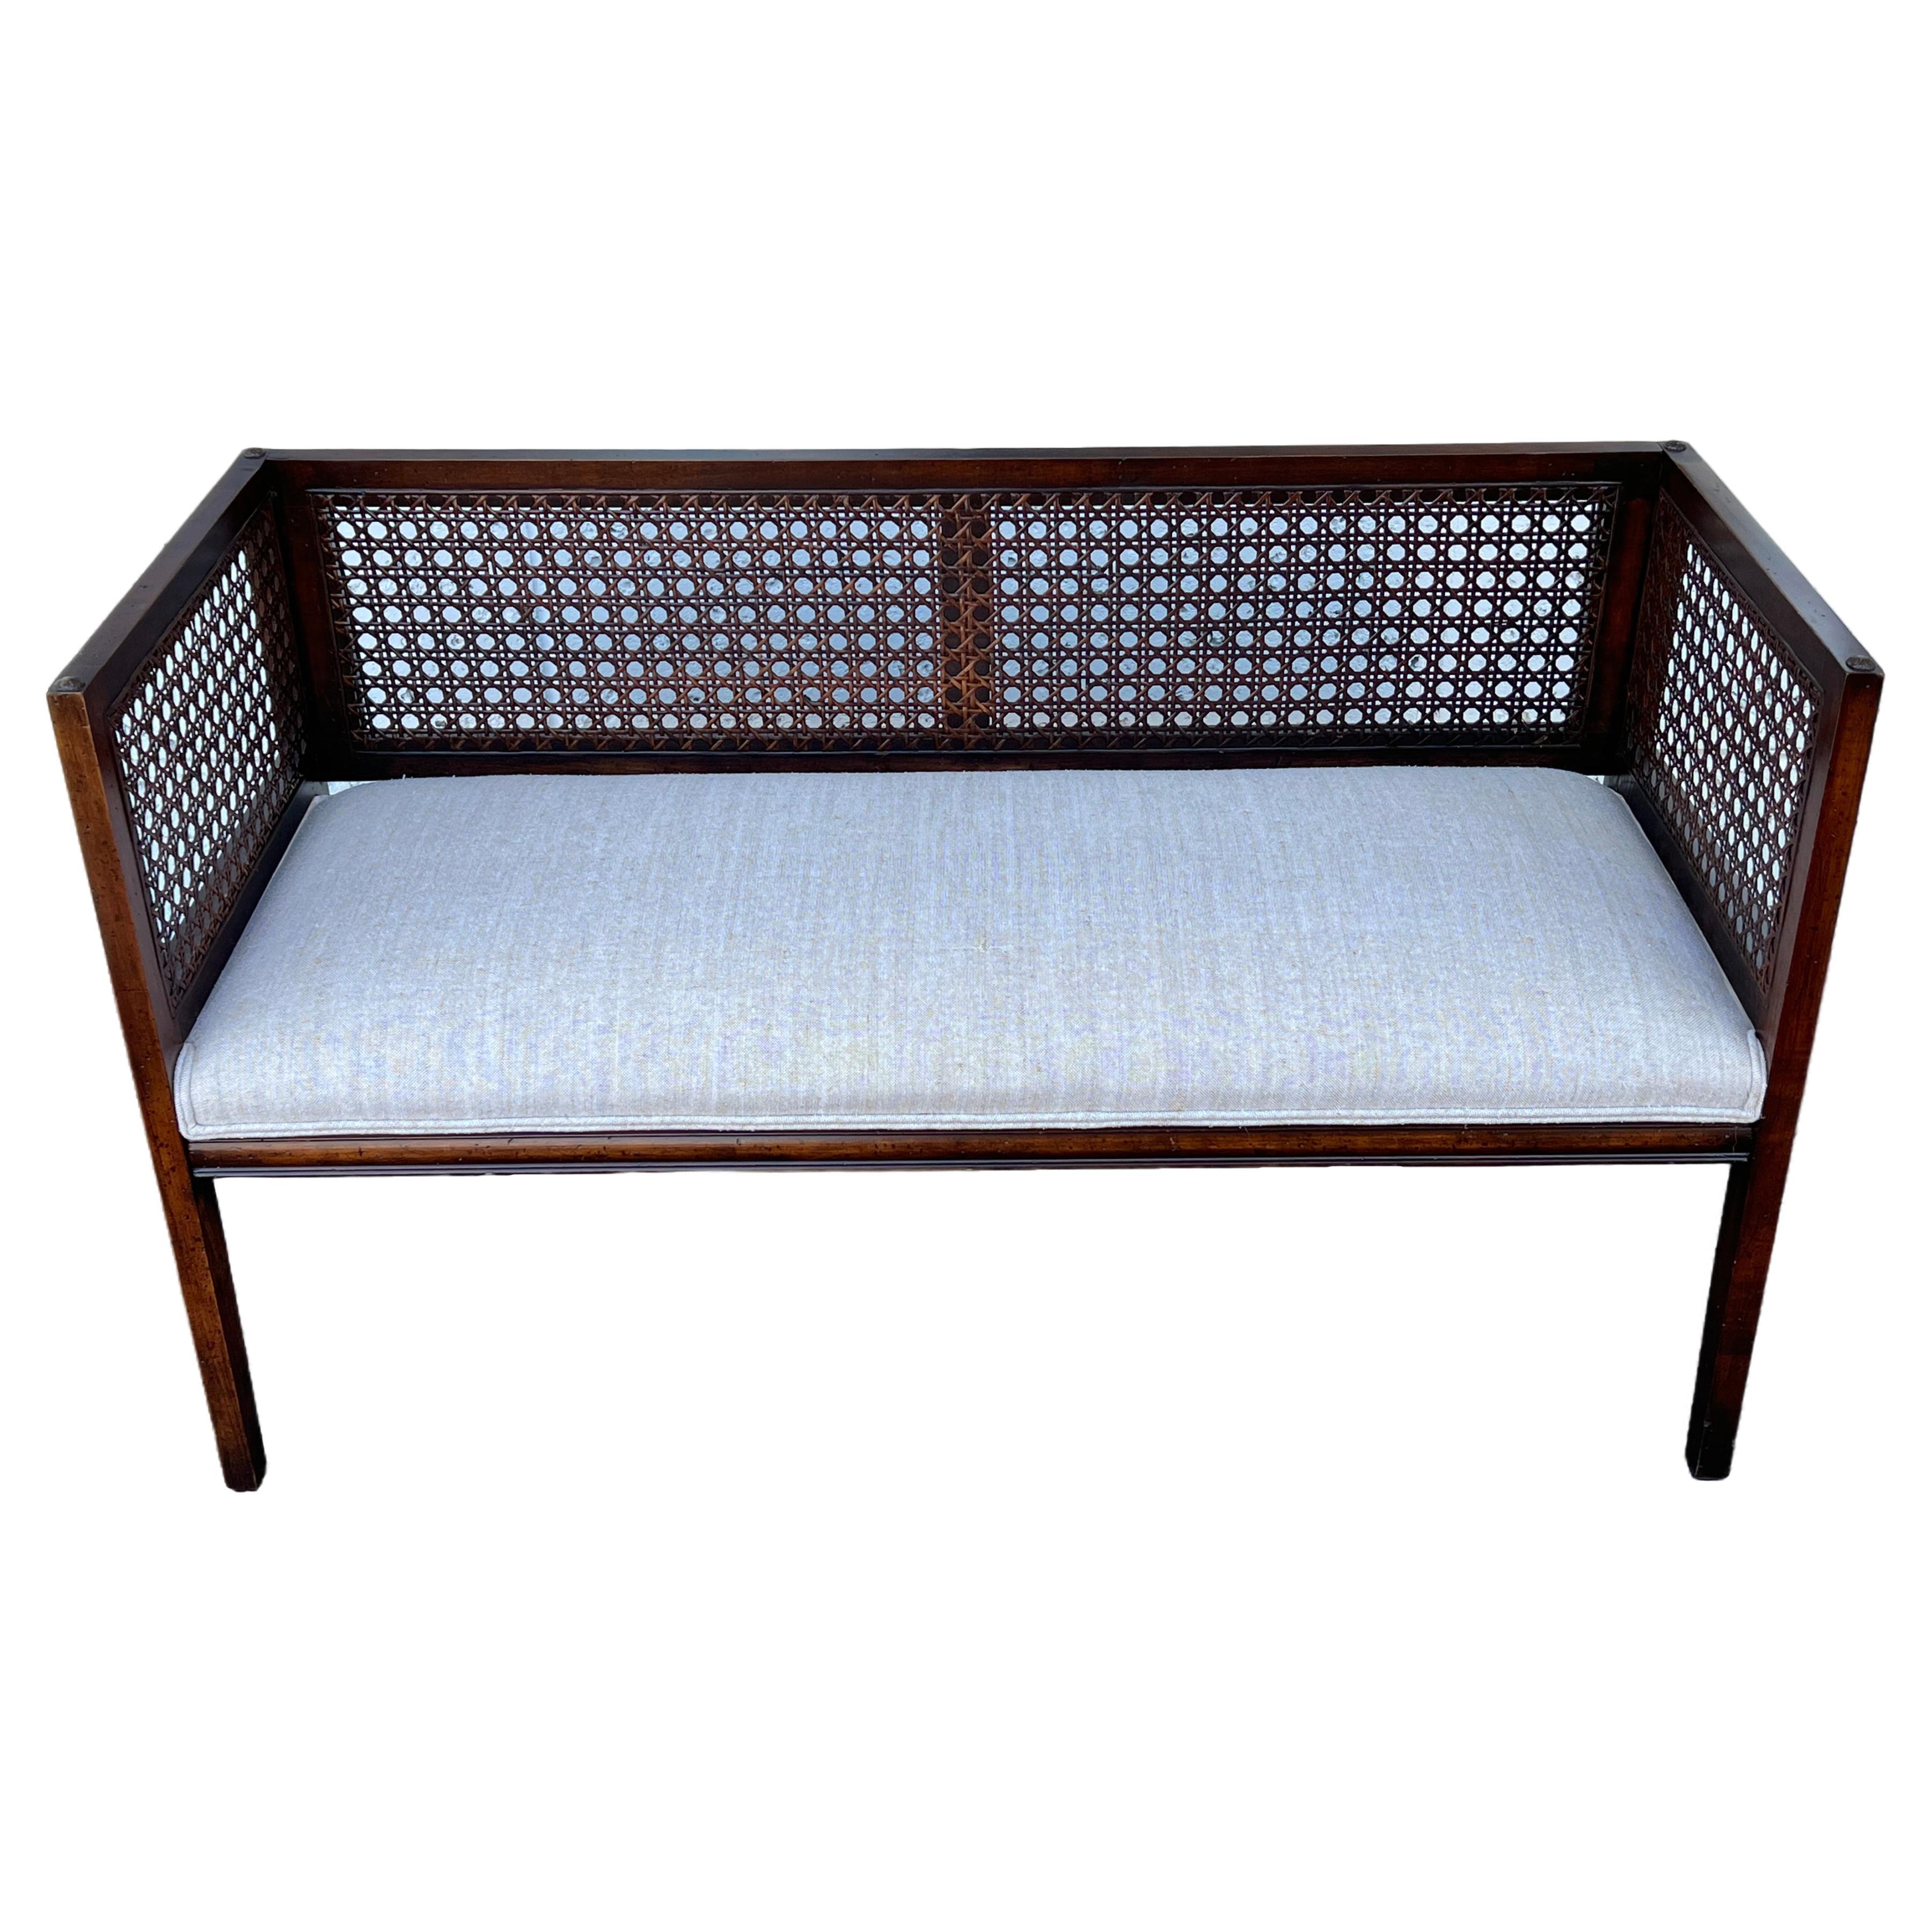 A Classic Upholstered Bench With Caned Back For Sale